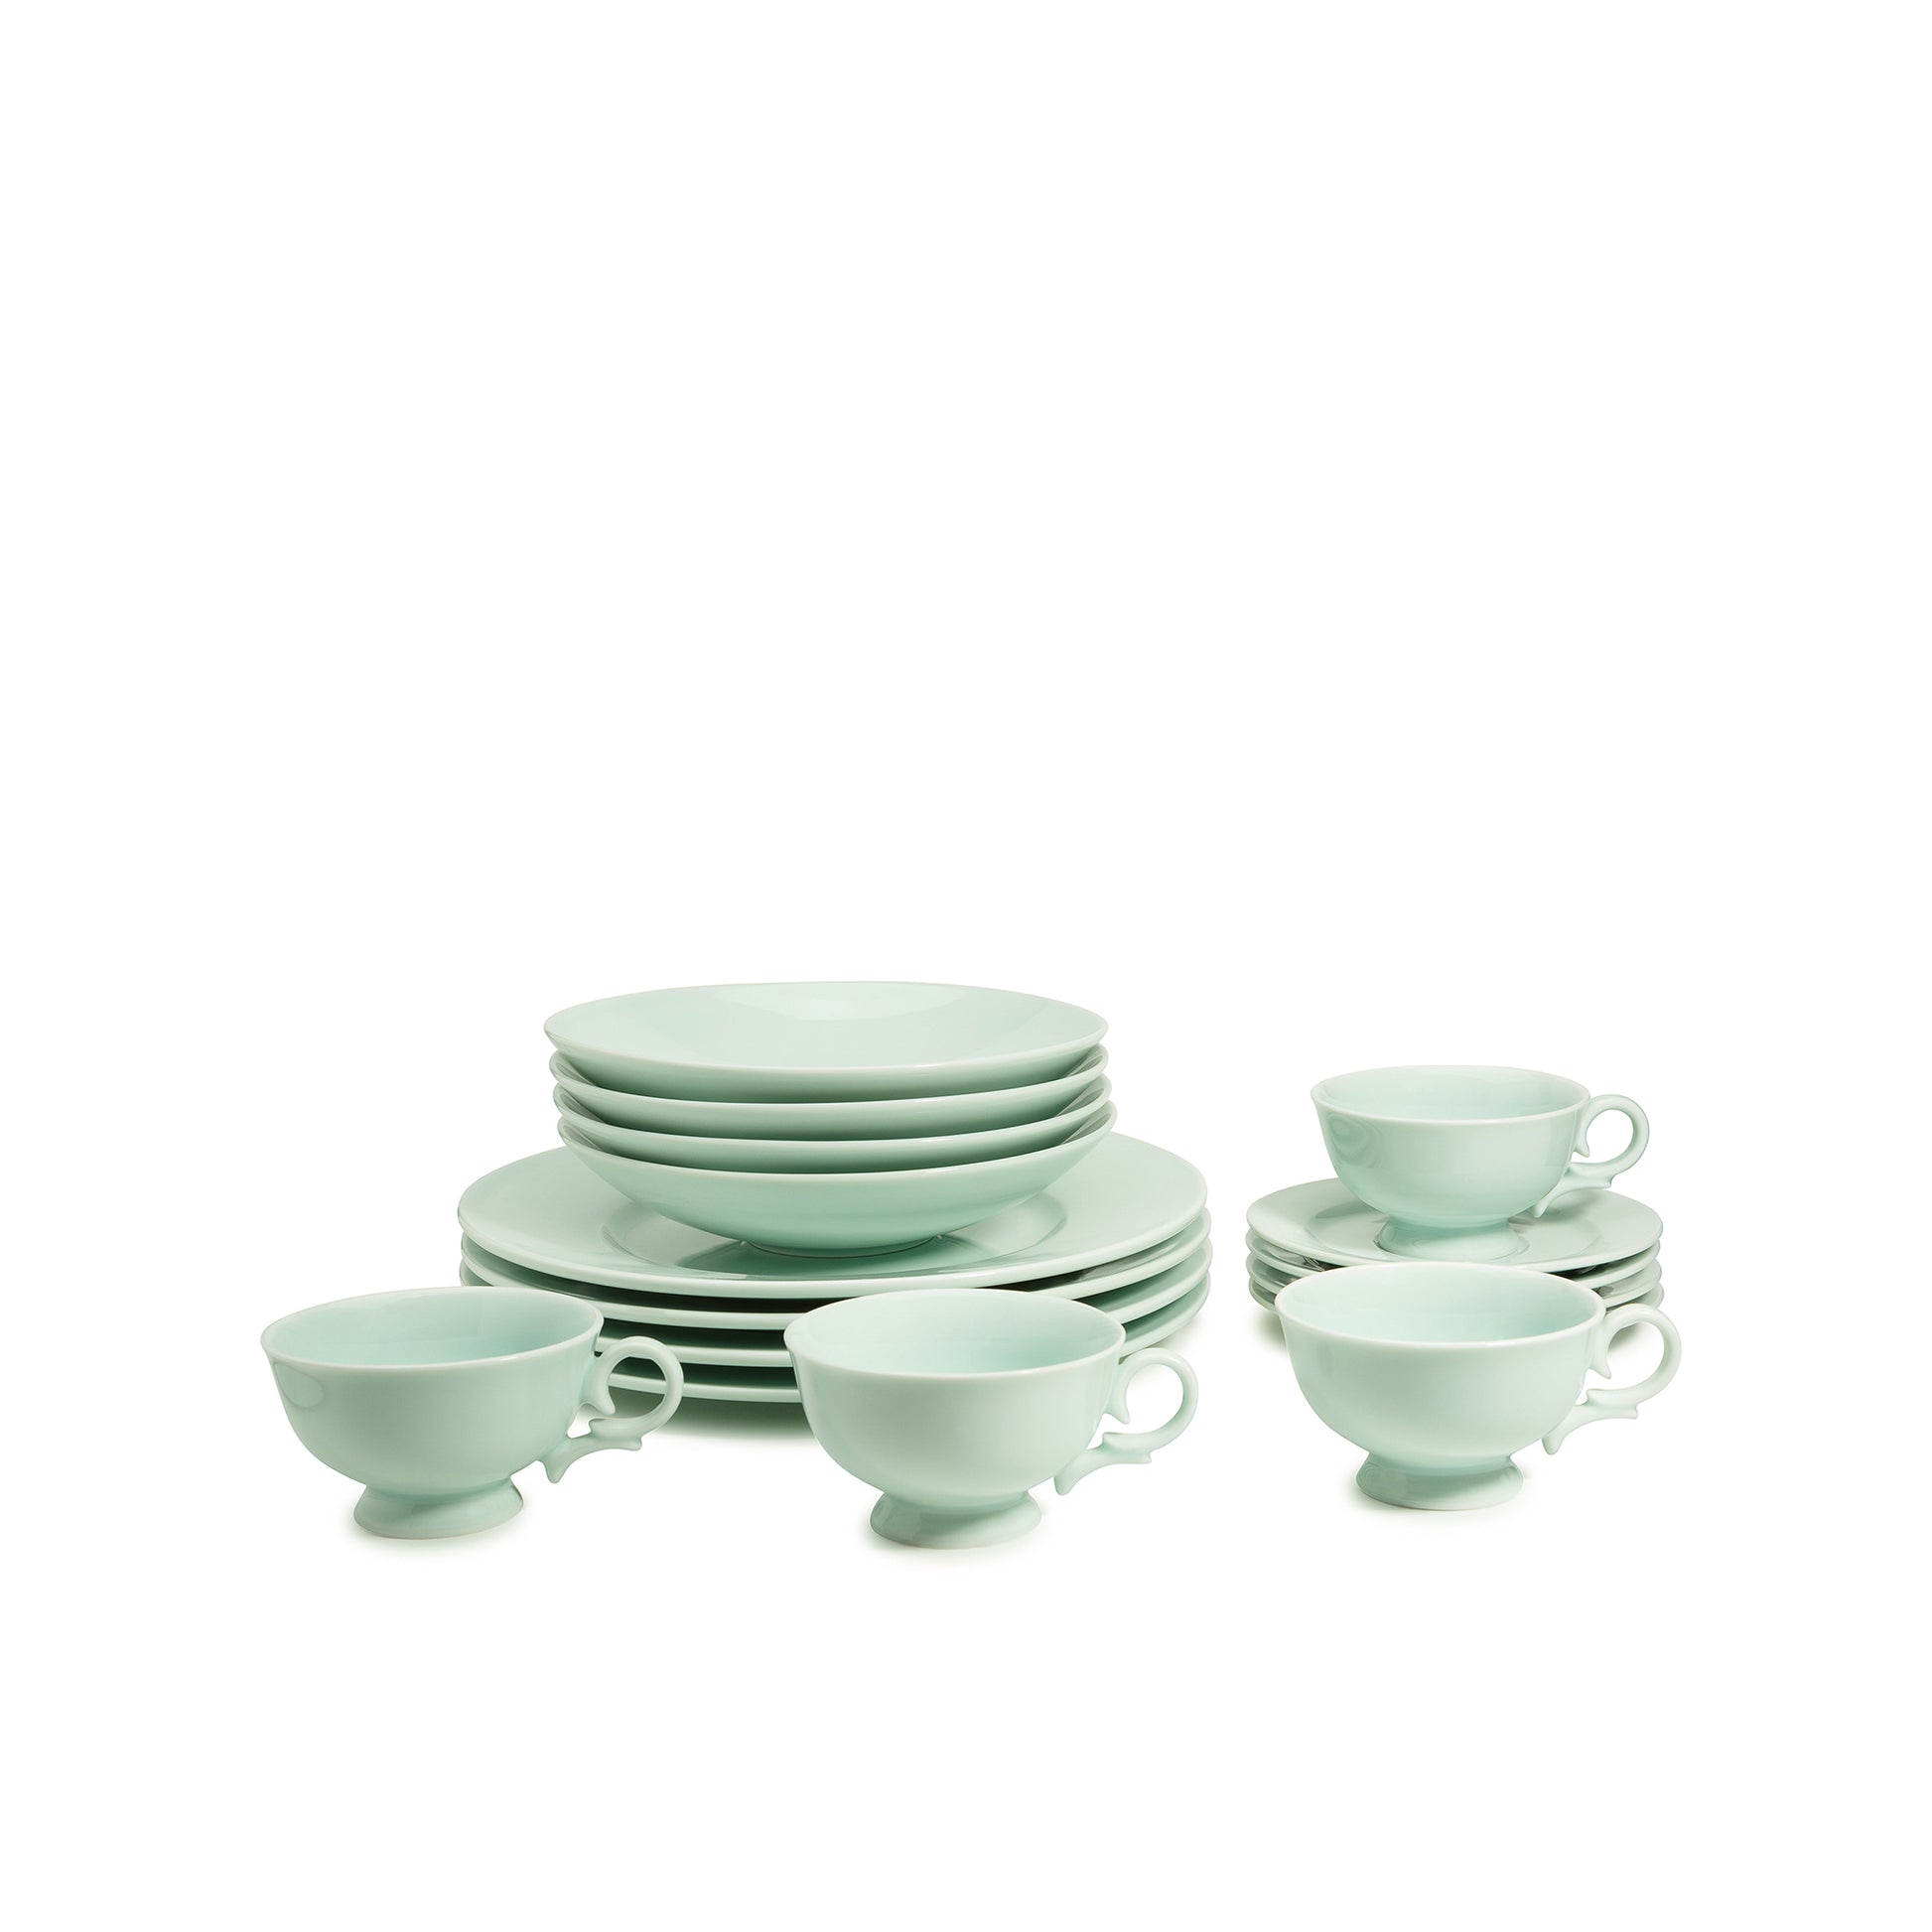 16 piece green celadon porcelain dinnerware set, dinner plates, 8" salad bowls, coffee cups and saucers, media 4 of 5